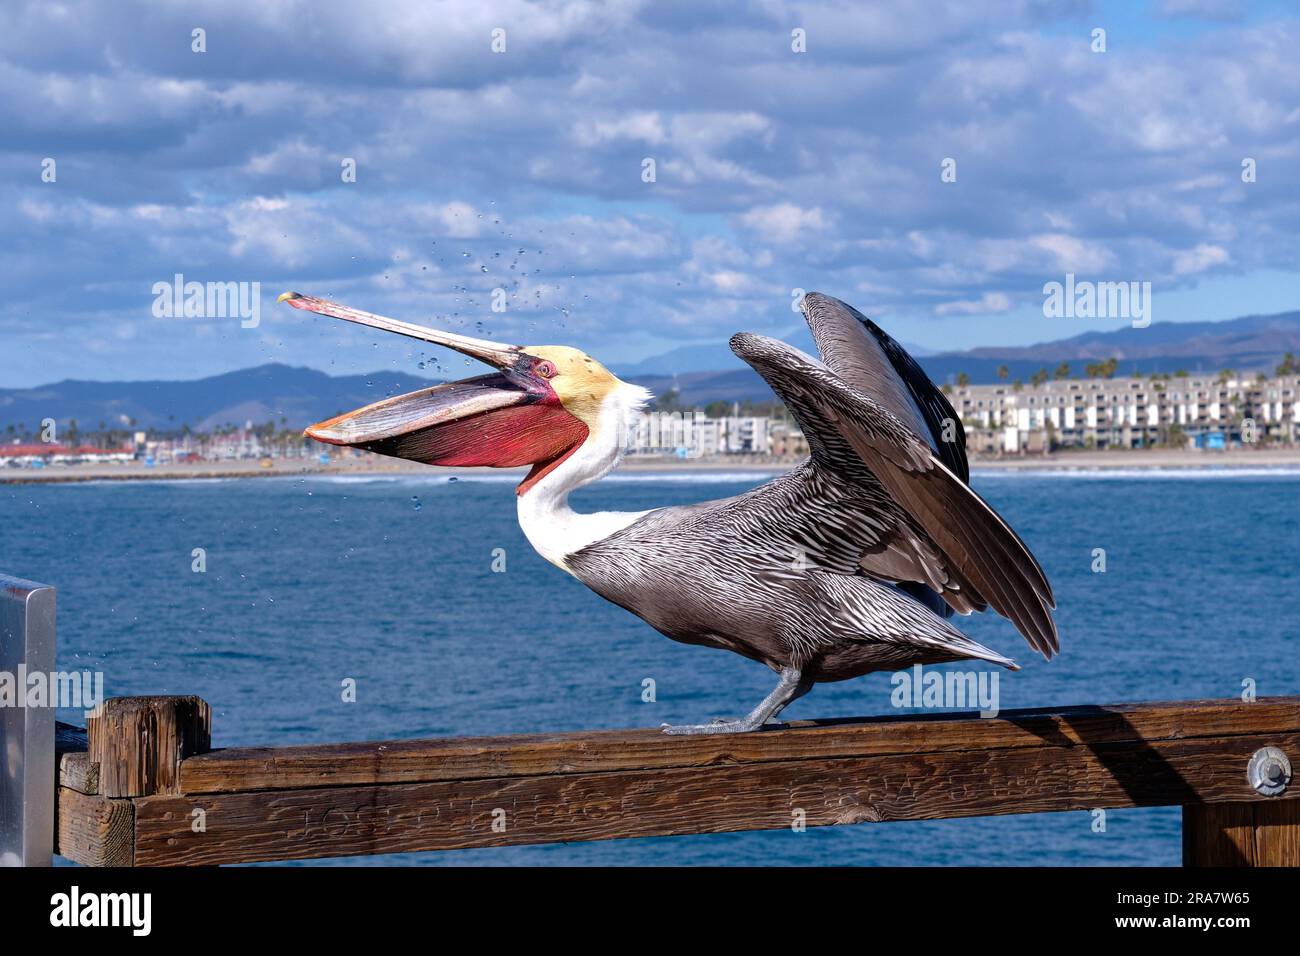 Open Wide! Brown Pelican opens beak and wings displaying a red throat pouch while waiting for fish. Oceanside Municipal Fishing Pier, California. Stock Photo